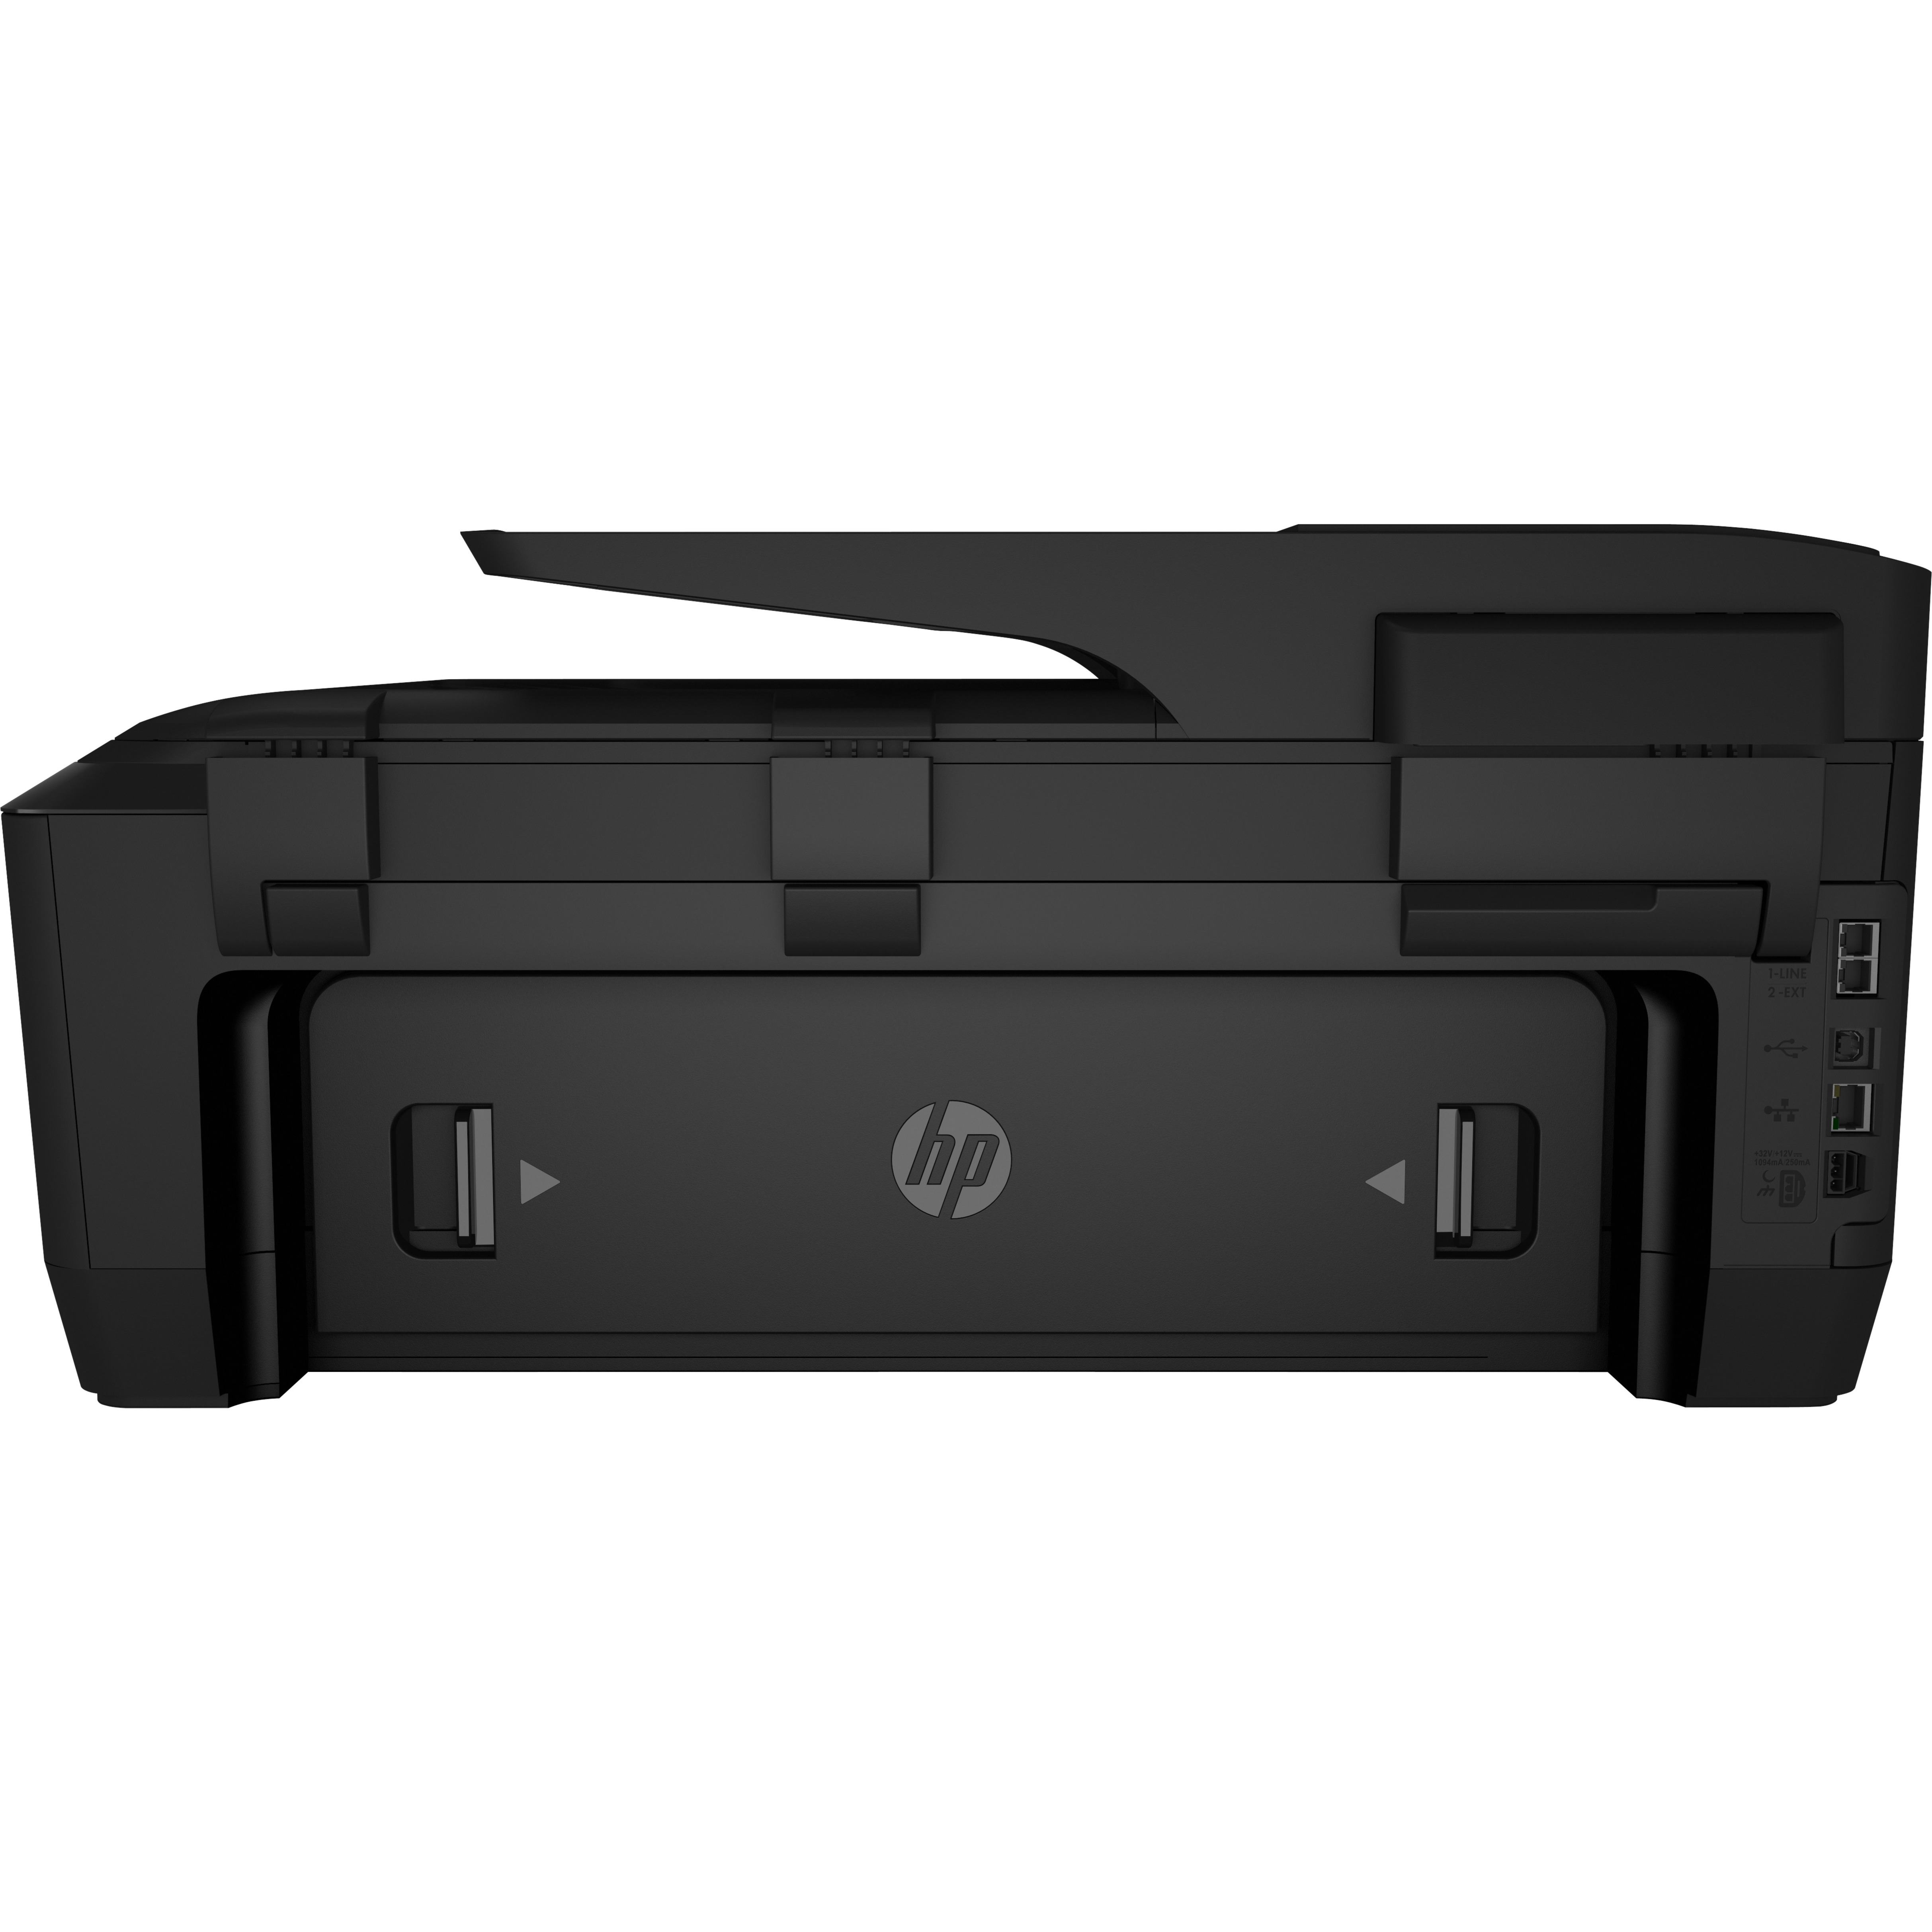 HP Officejet 7510 Wide Format All-in-One - multifunction printer (color) - image 5 of 7